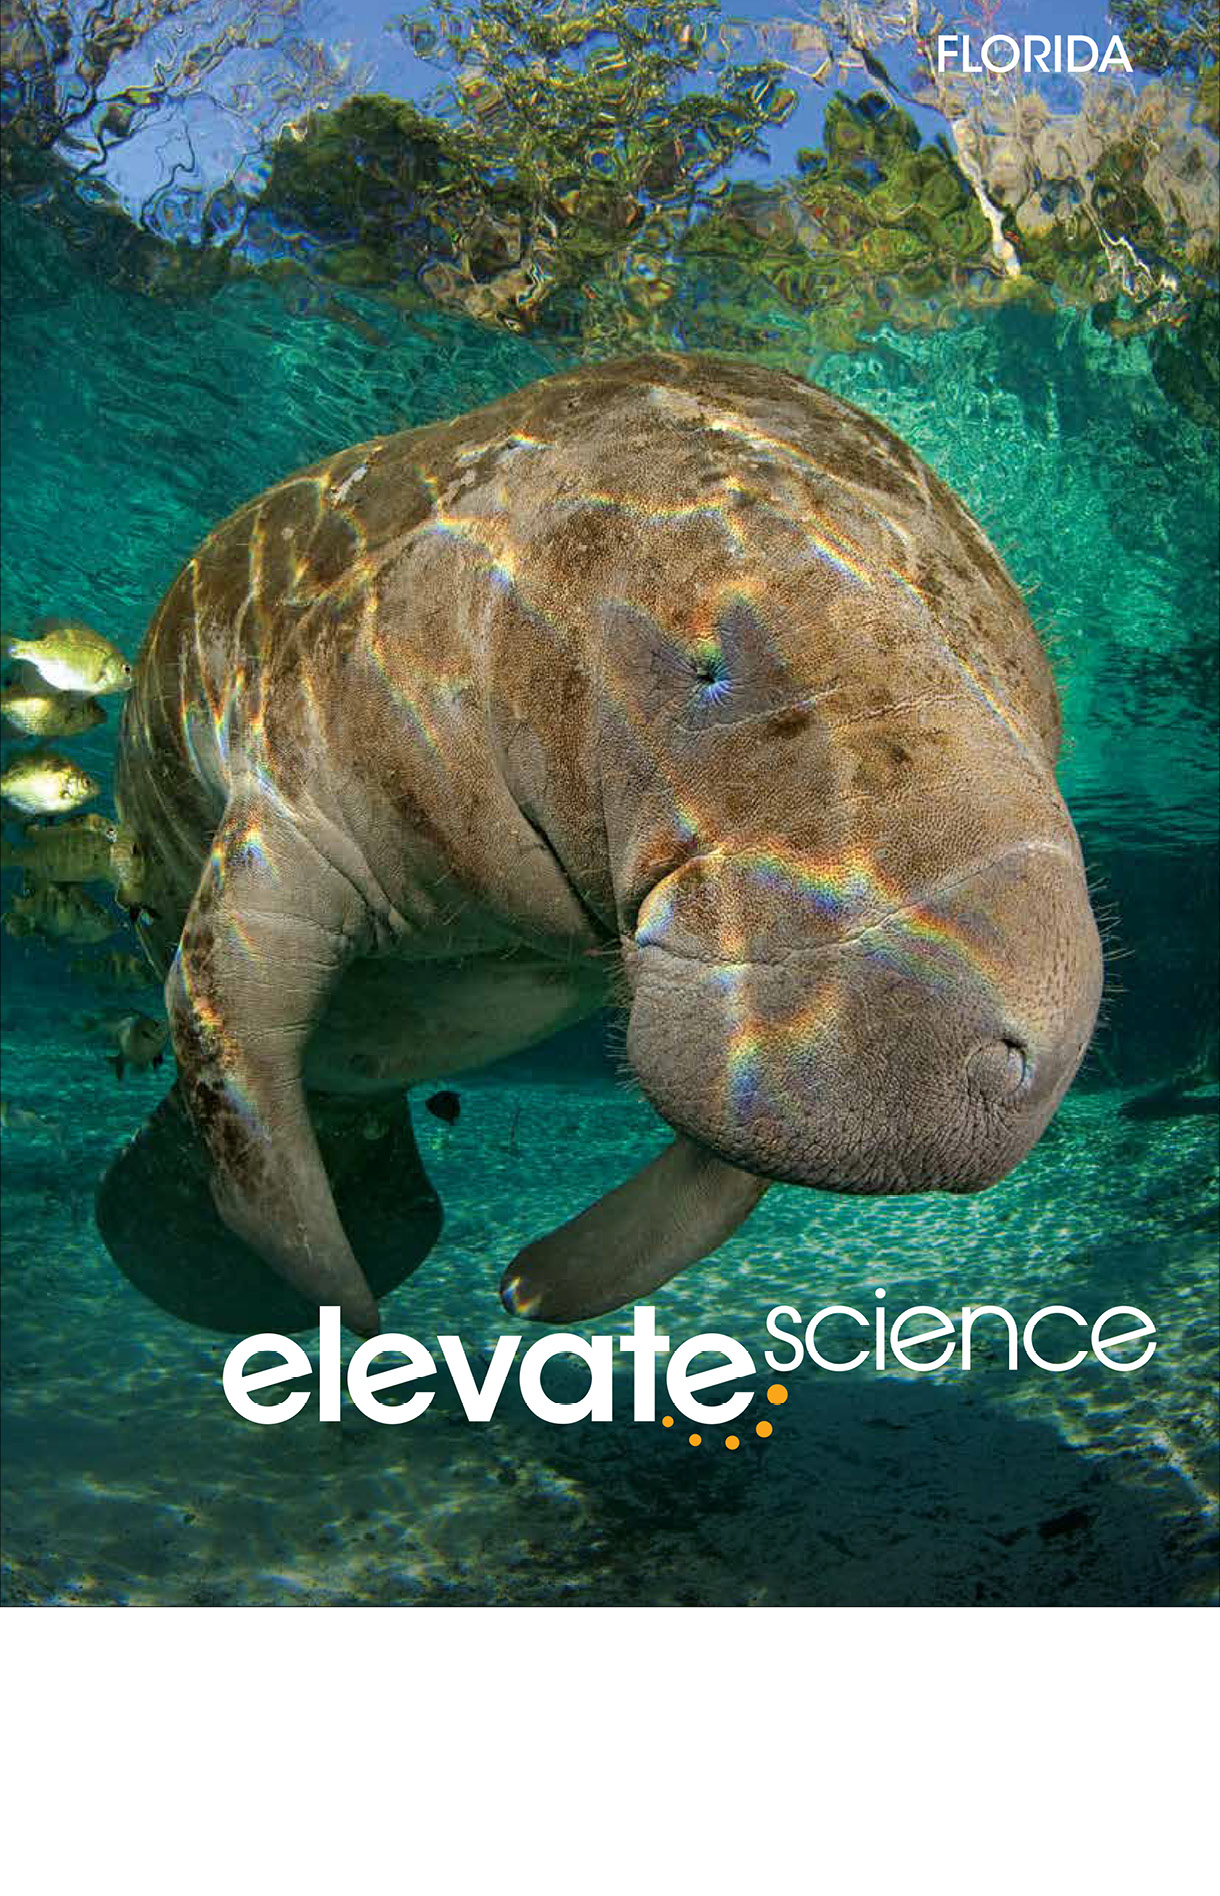 Book cover Elevate Science book. It has a manatee swimming.